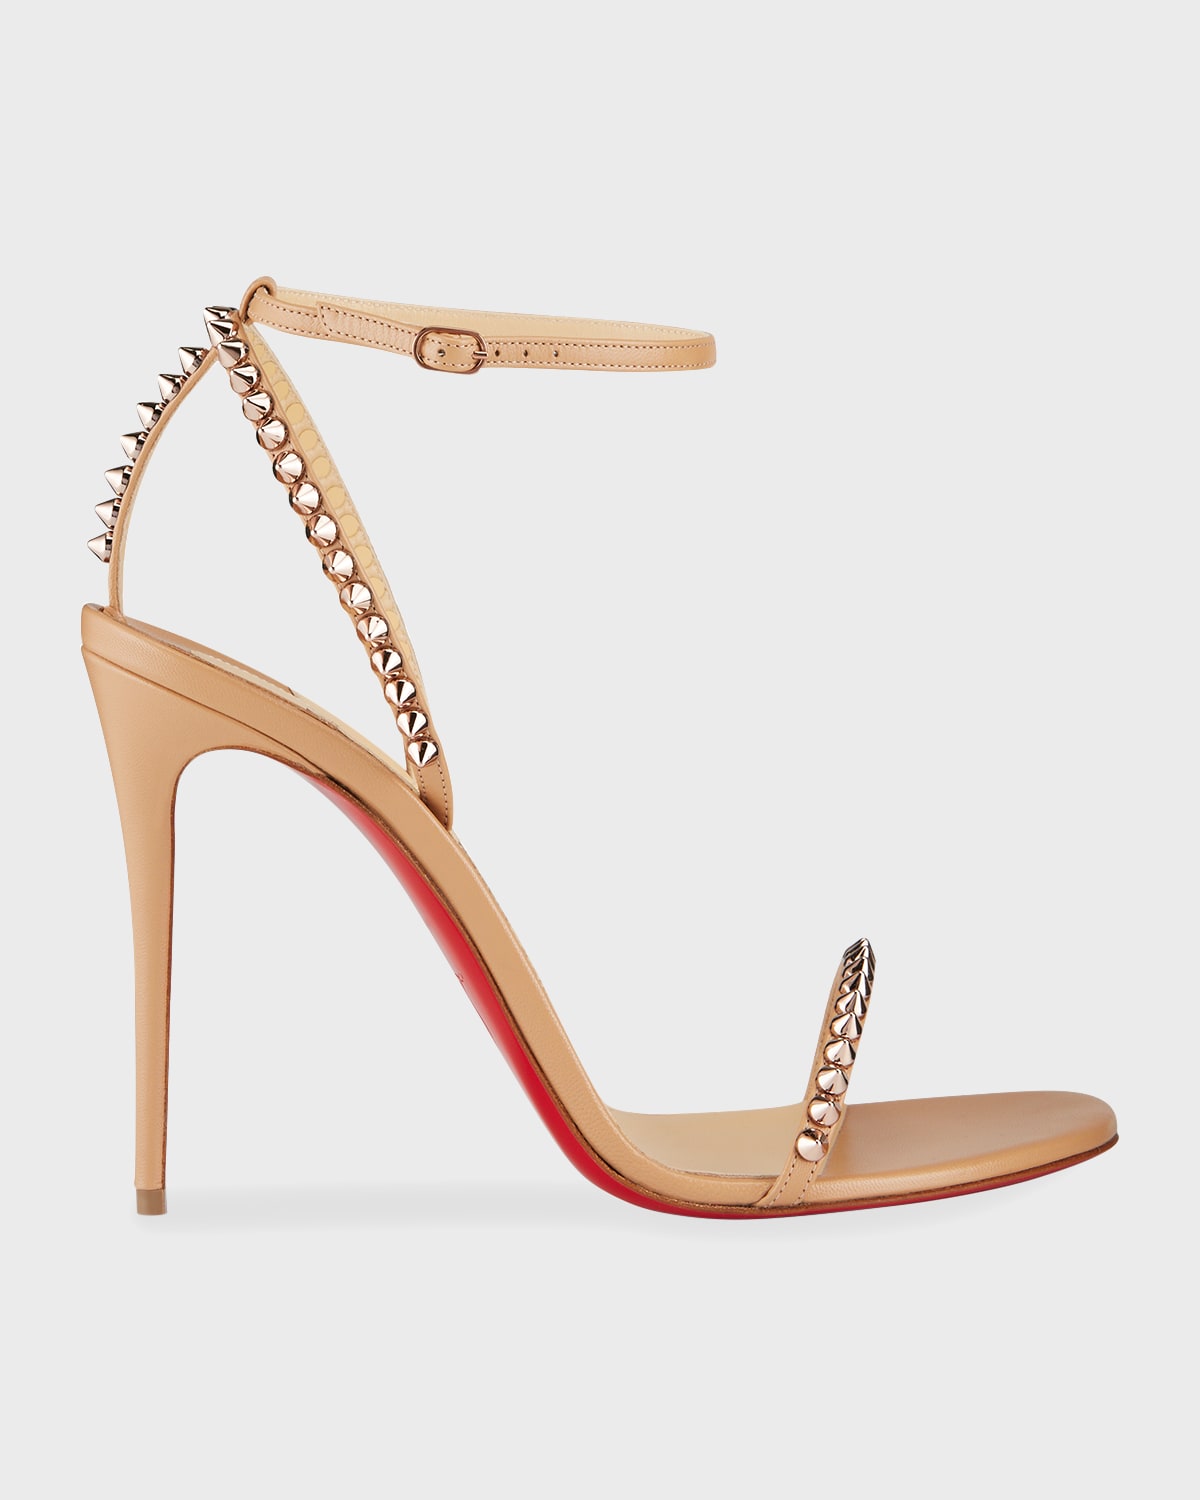 Christian Louboutin So Me Spike Red Sole Sandals In Blush